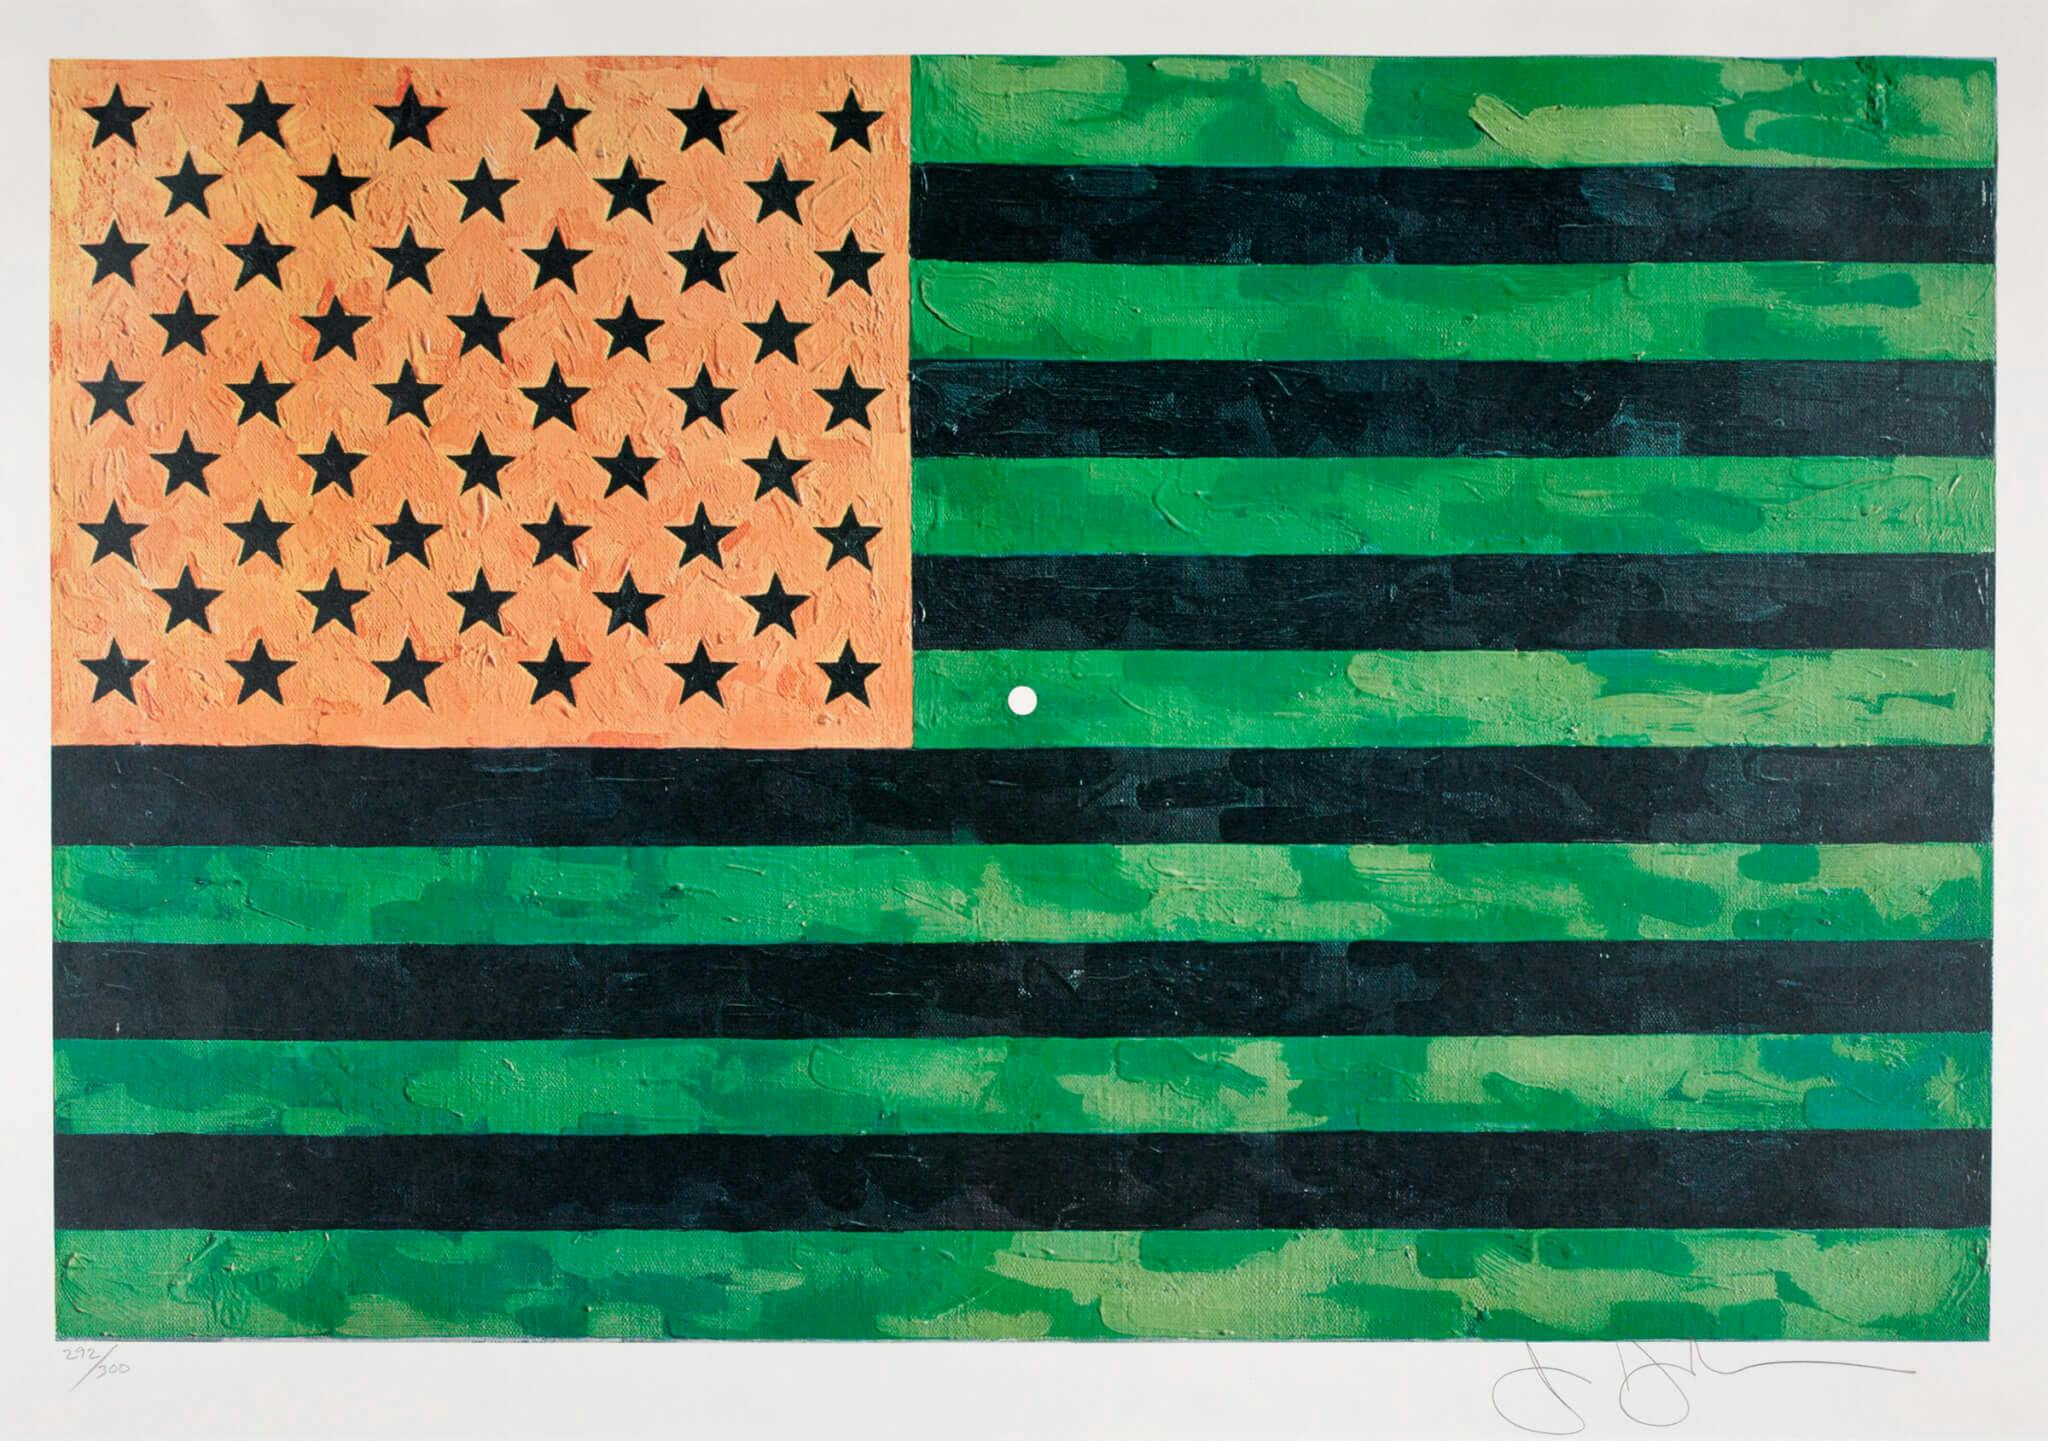 Image of an orange, green, and black version of the American flag.